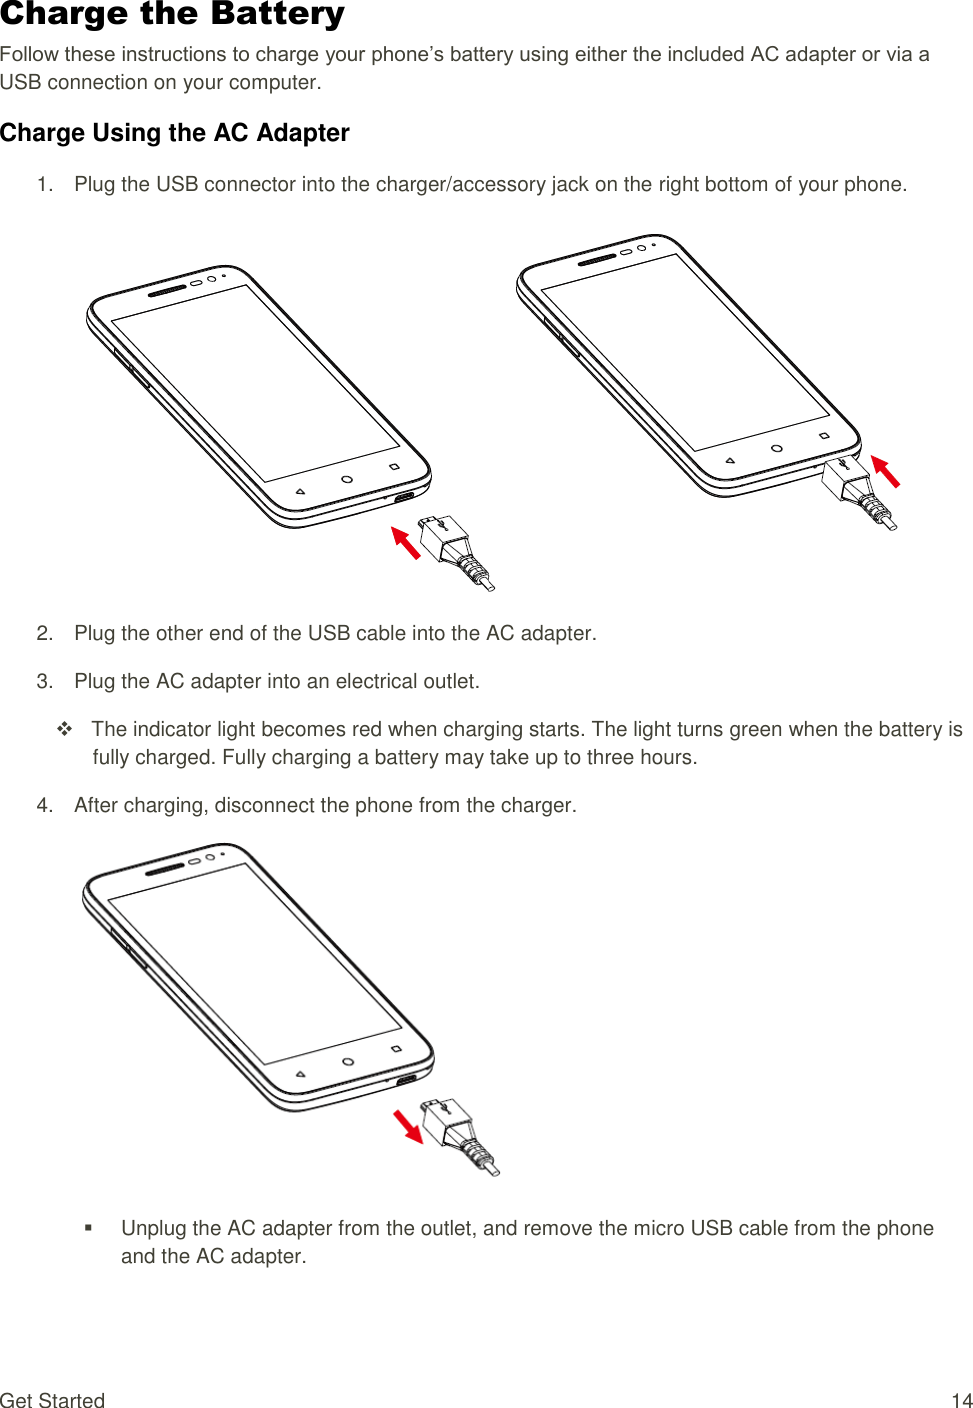 Get Started  14 Charge the Battery Follow these instructions to charge your phone’s battery using either the included AC adapter or via a USB connection on your computer. Charge Using the AC Adapter 1.  Plug the USB connector into the charger/accessory jack on the right bottom of your phone.  2.  Plug the other end of the USB cable into the AC adapter. 3.  Plug the AC adapter into an electrical outlet.      The indicator light becomes red when charging starts. The light turns green when the battery is fully charged. Fully charging a battery may take up to three hours. 4.  After charging, disconnect the phone from the charger.    Unplug the AC adapter from the outlet, and remove the micro USB cable from the phone and the AC adapter. 